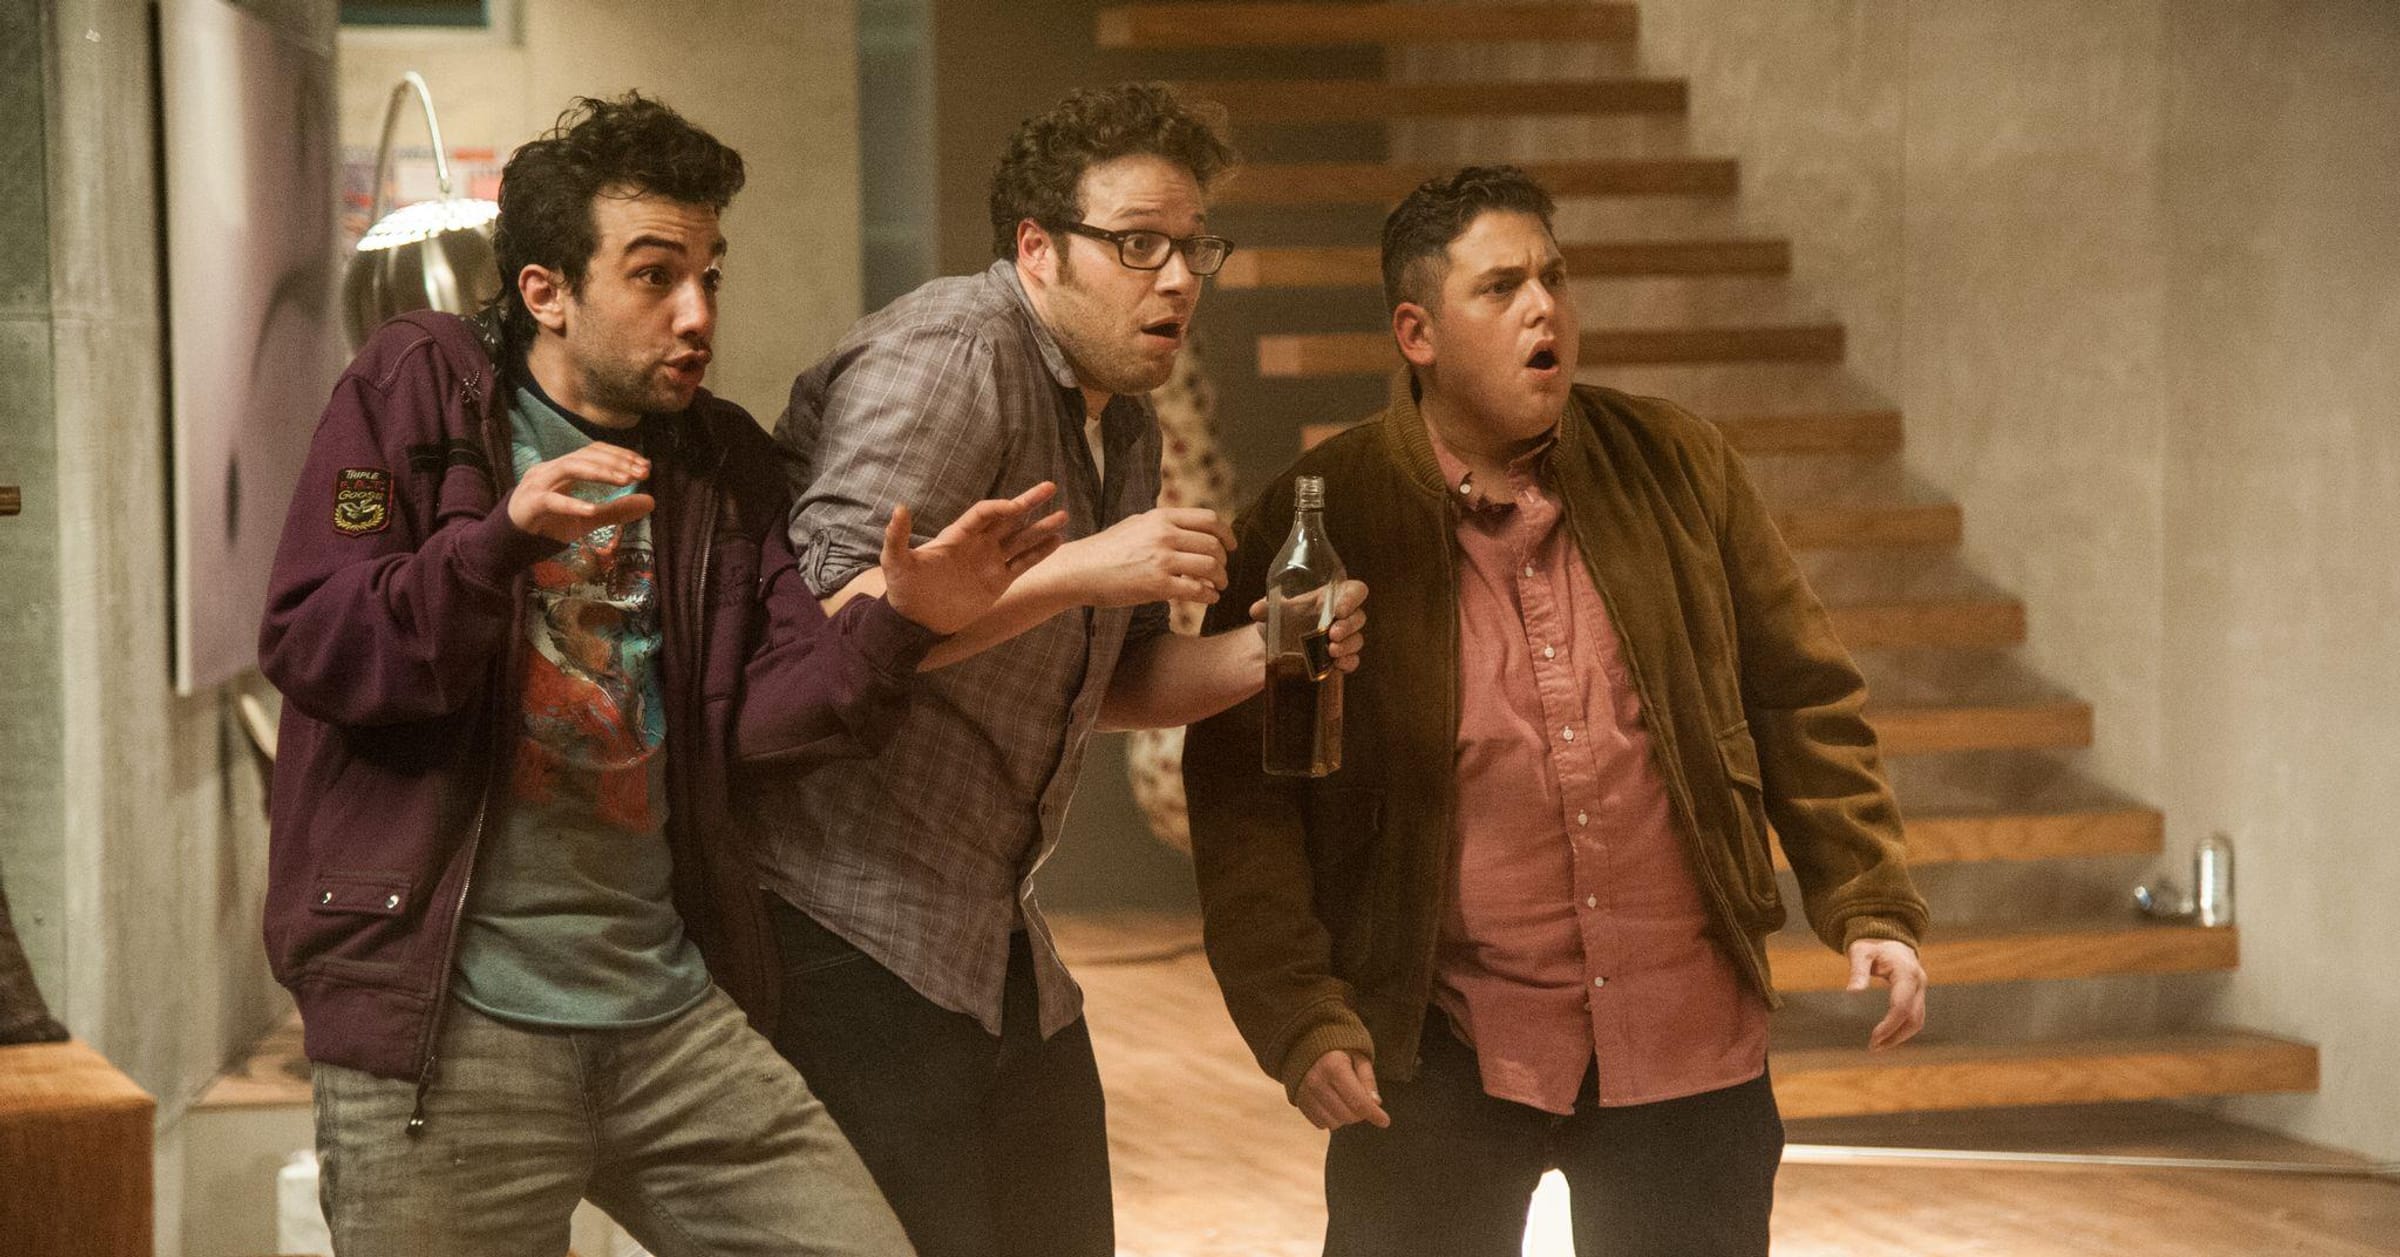 Jonah Hill Hated Superbad Costar Christopher Mintz-Plasse at First